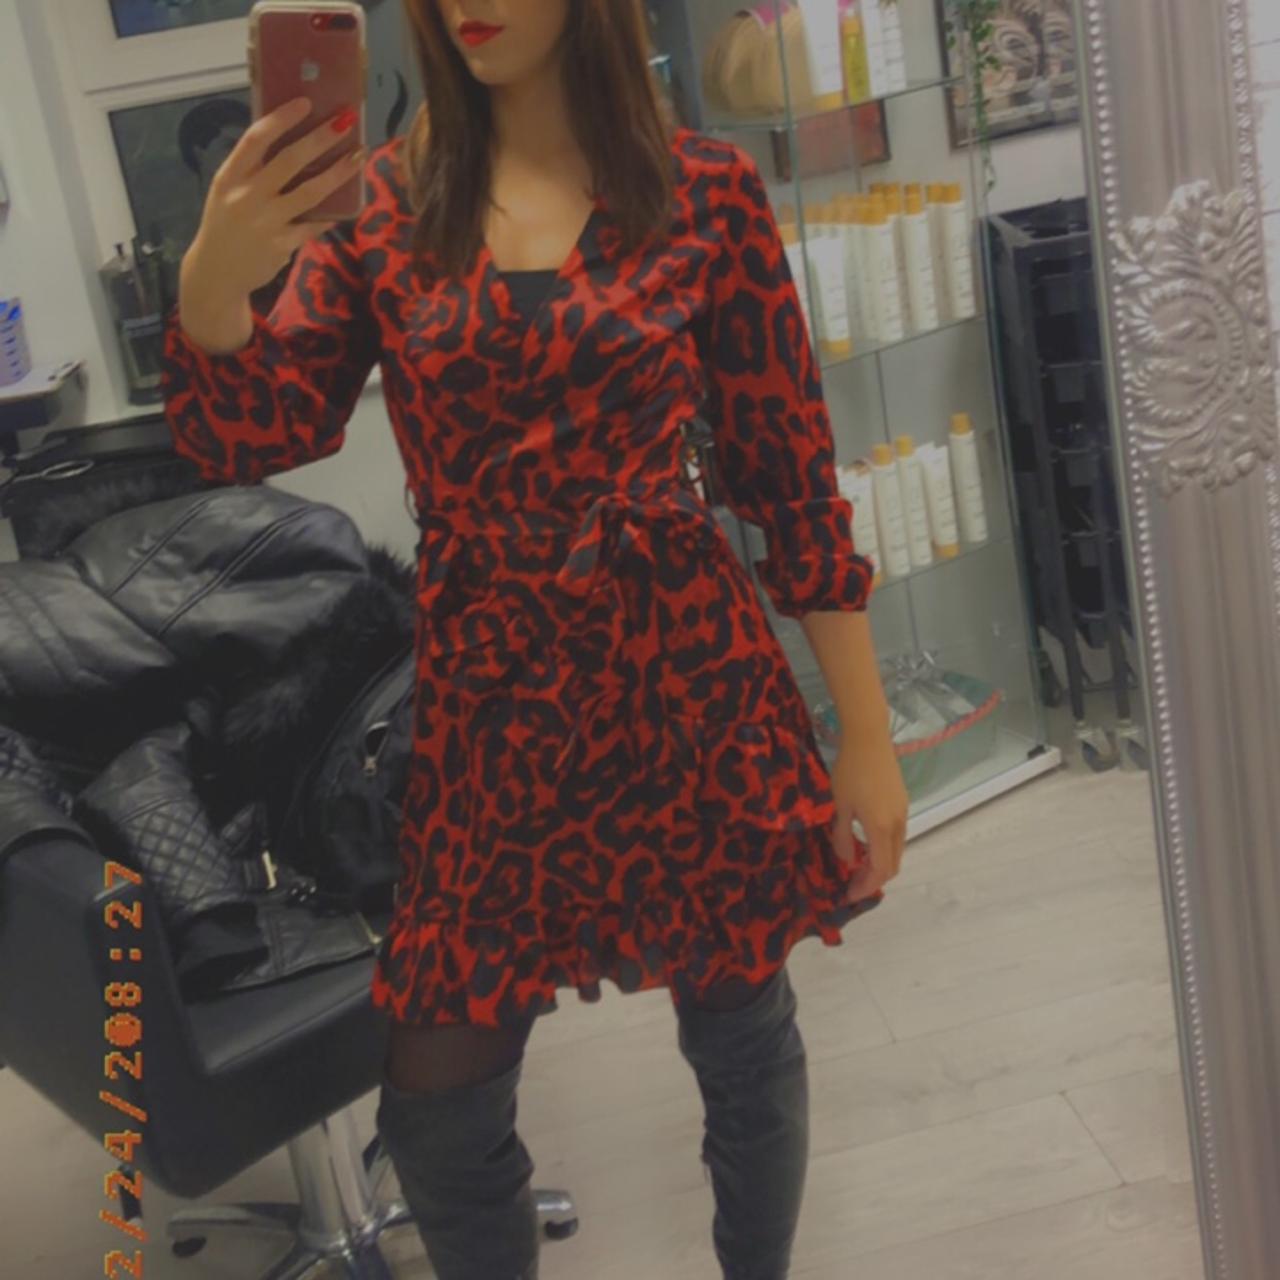 AX Paris red leopard print dress teamed with My Louis Vuitton